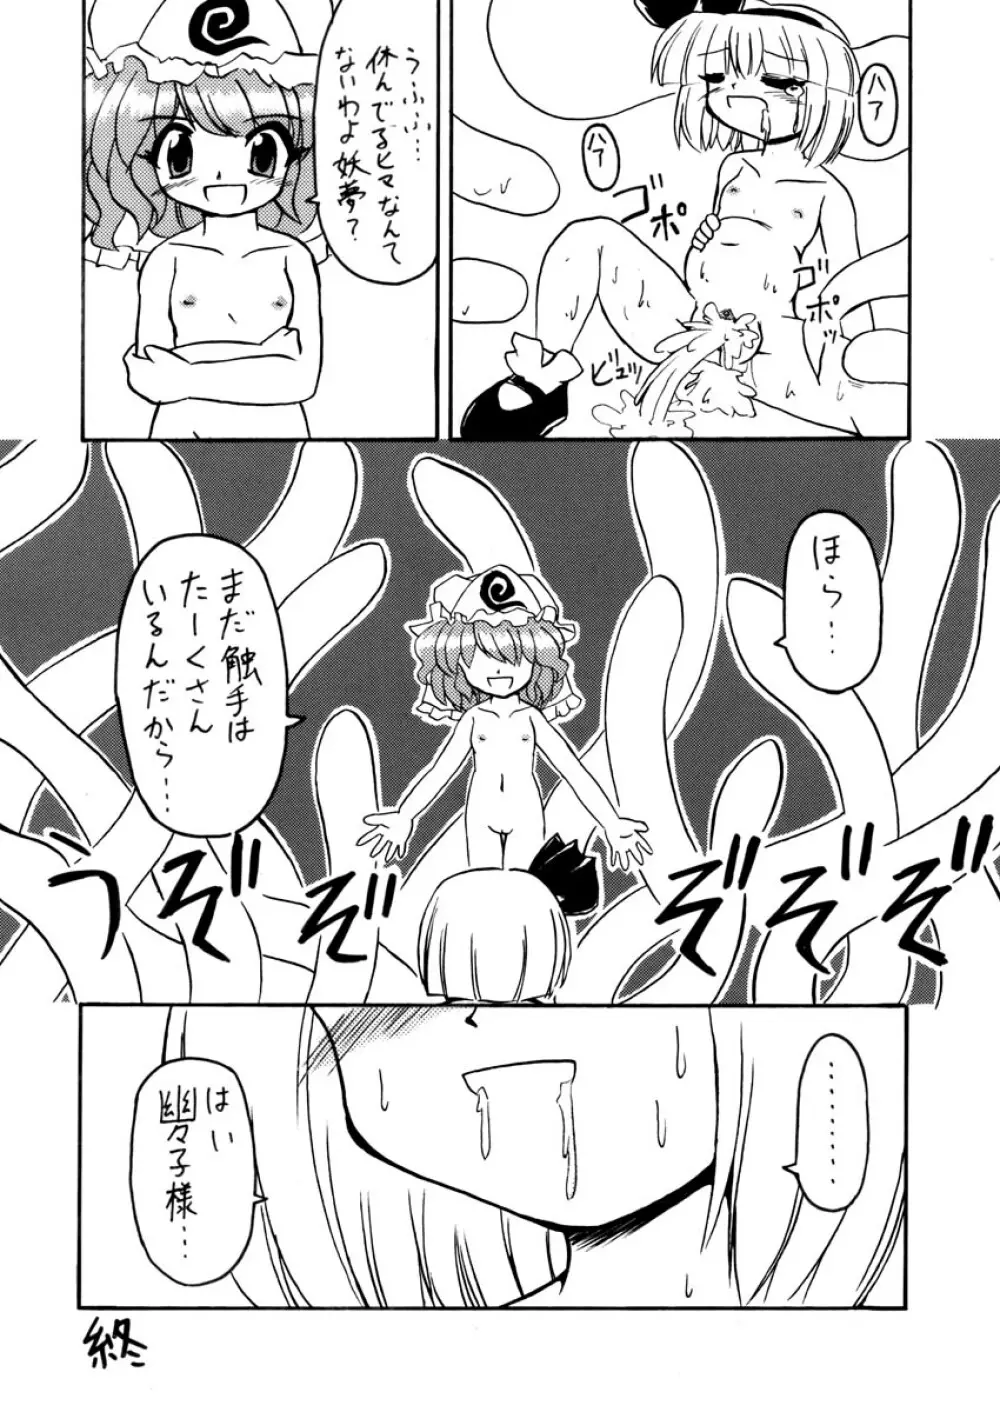 Touhou Tentacles {Touhou Project} - page10